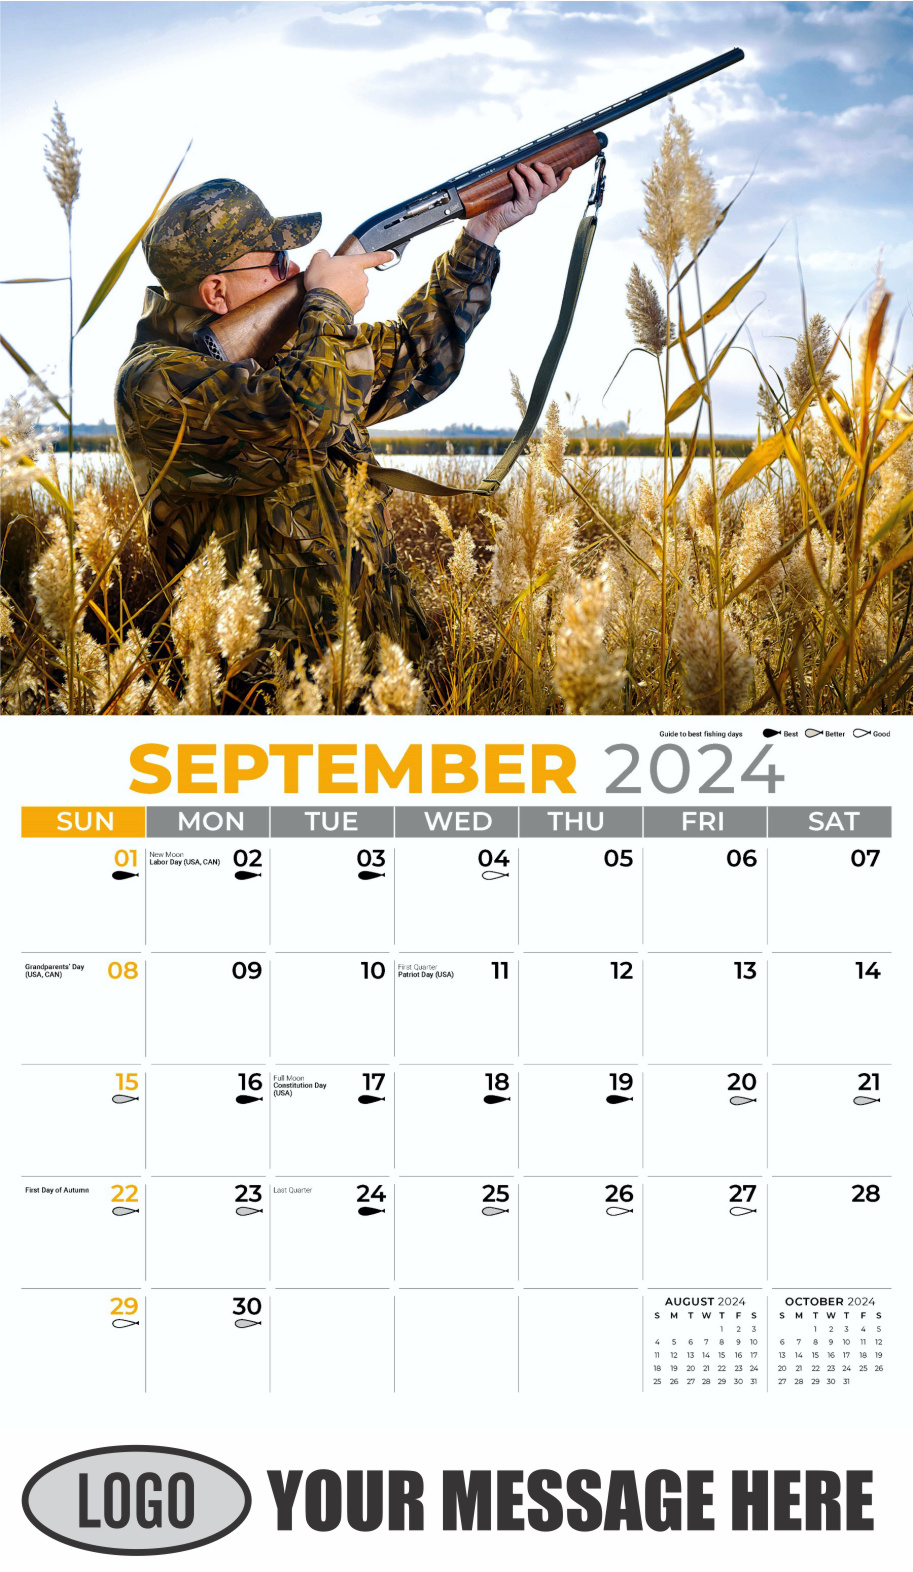 Fishing and Hunting 2024 Business Promotion Calendar - September